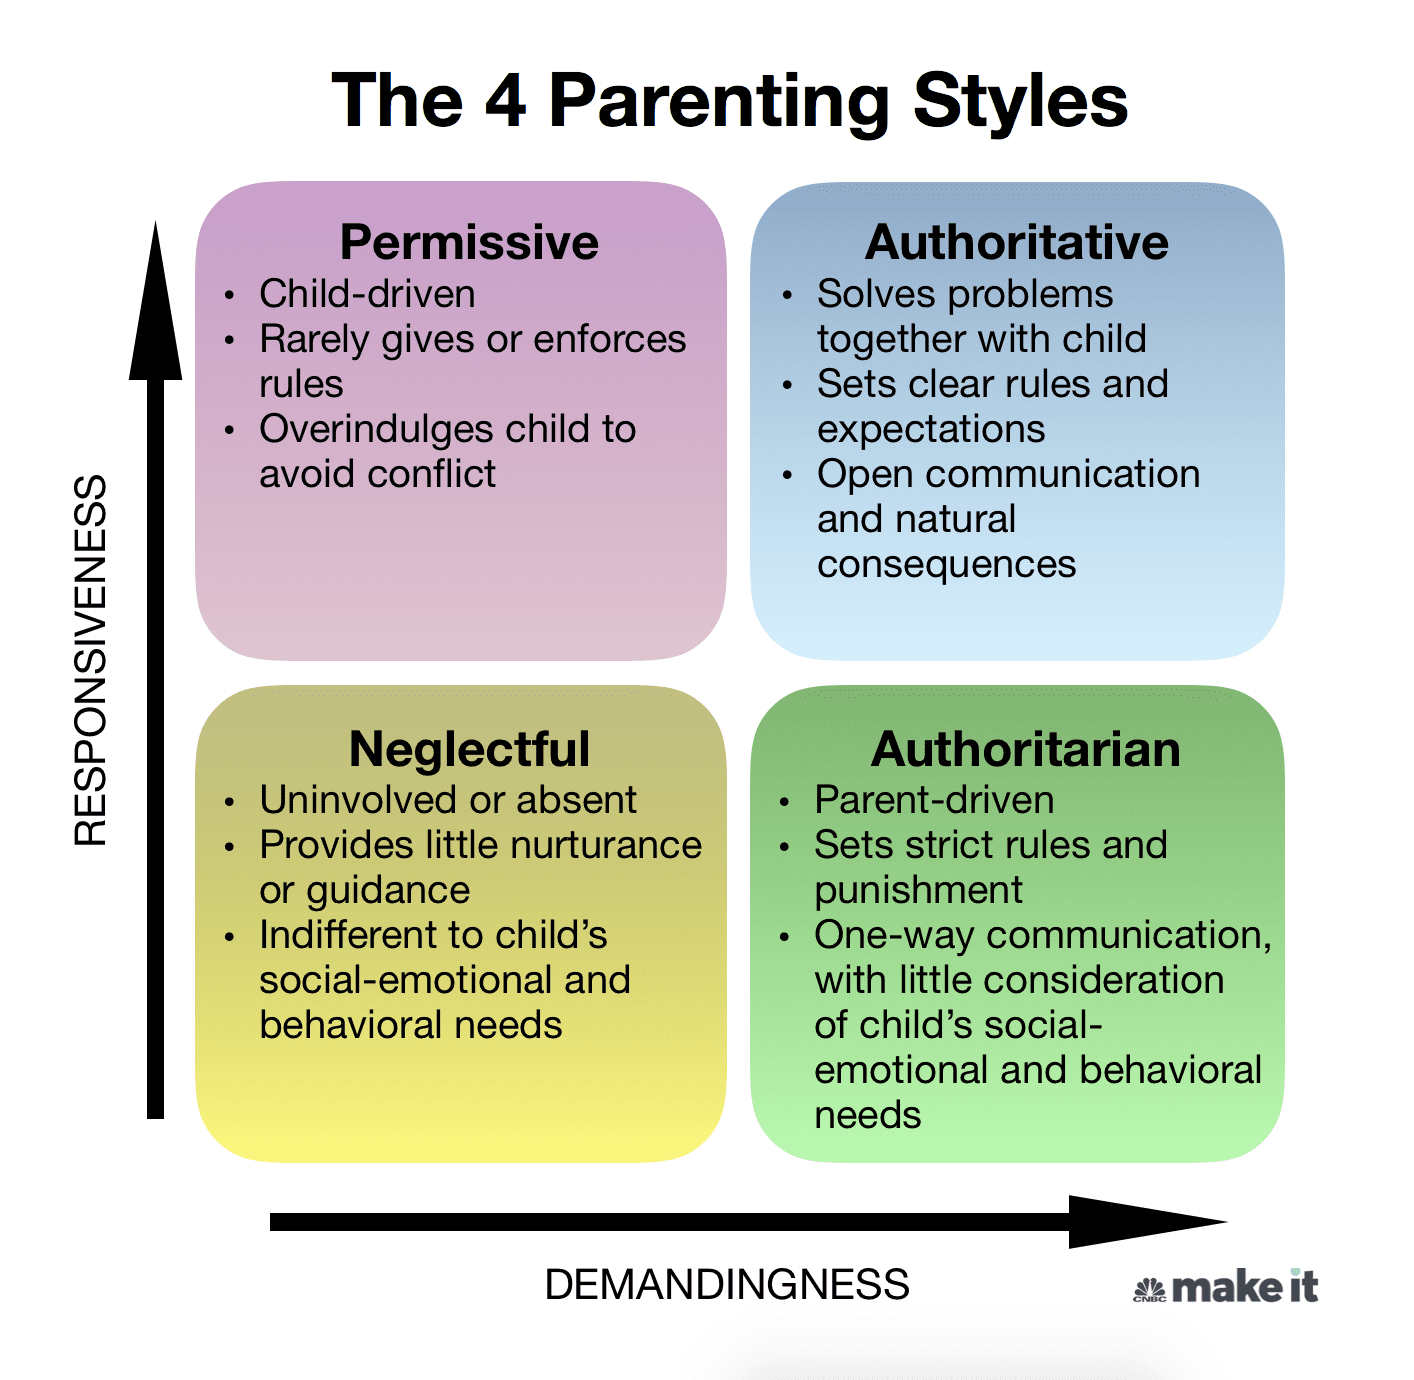 What are the benefits of an "authoritative parenting style"